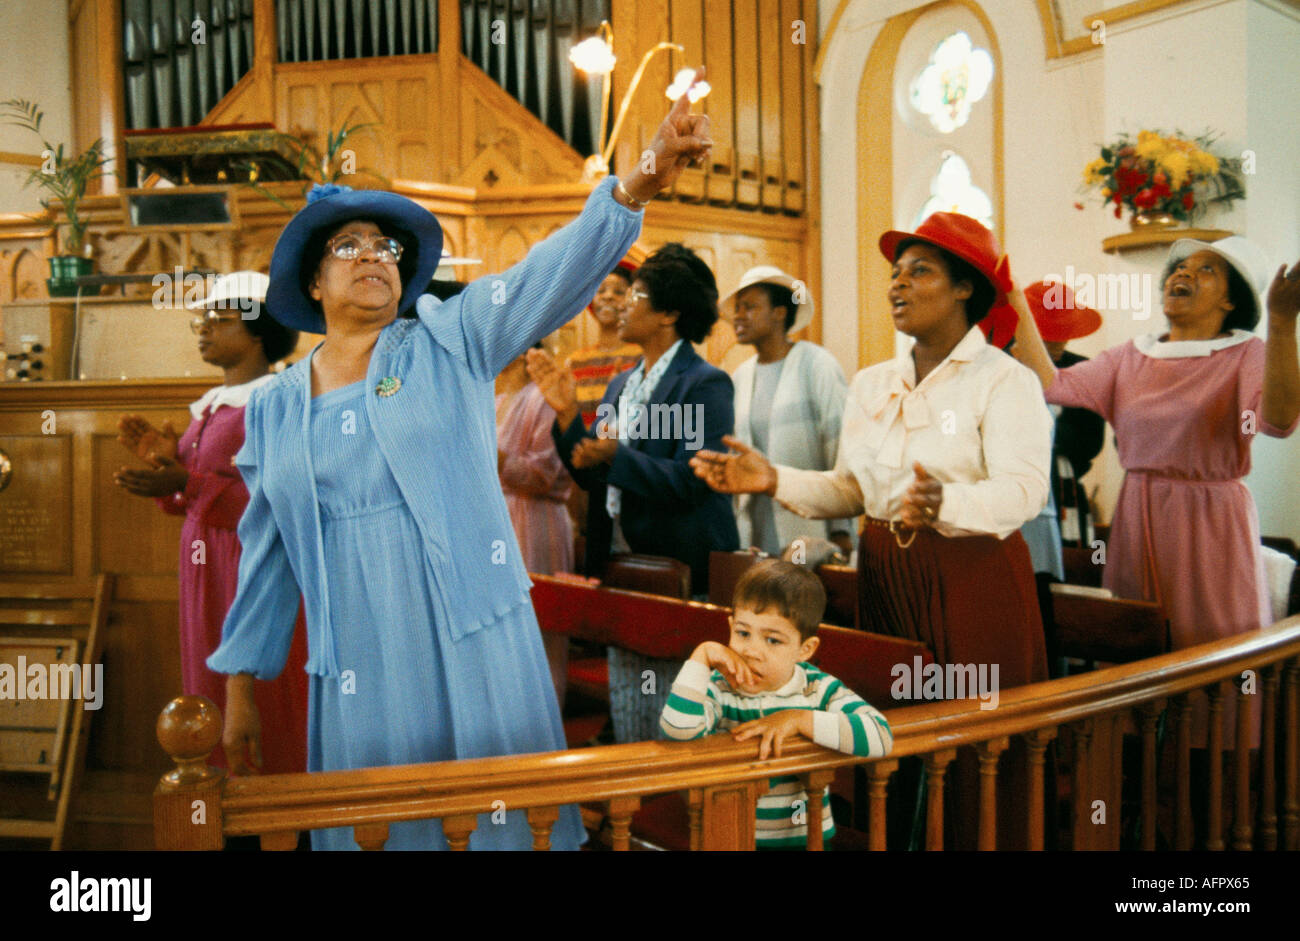 Praise The Lord is cried out Pentecostal church service in Brixton 1990s UK multiethnic Sunday worship south London 90s England HOMER SYKES Stock Photo